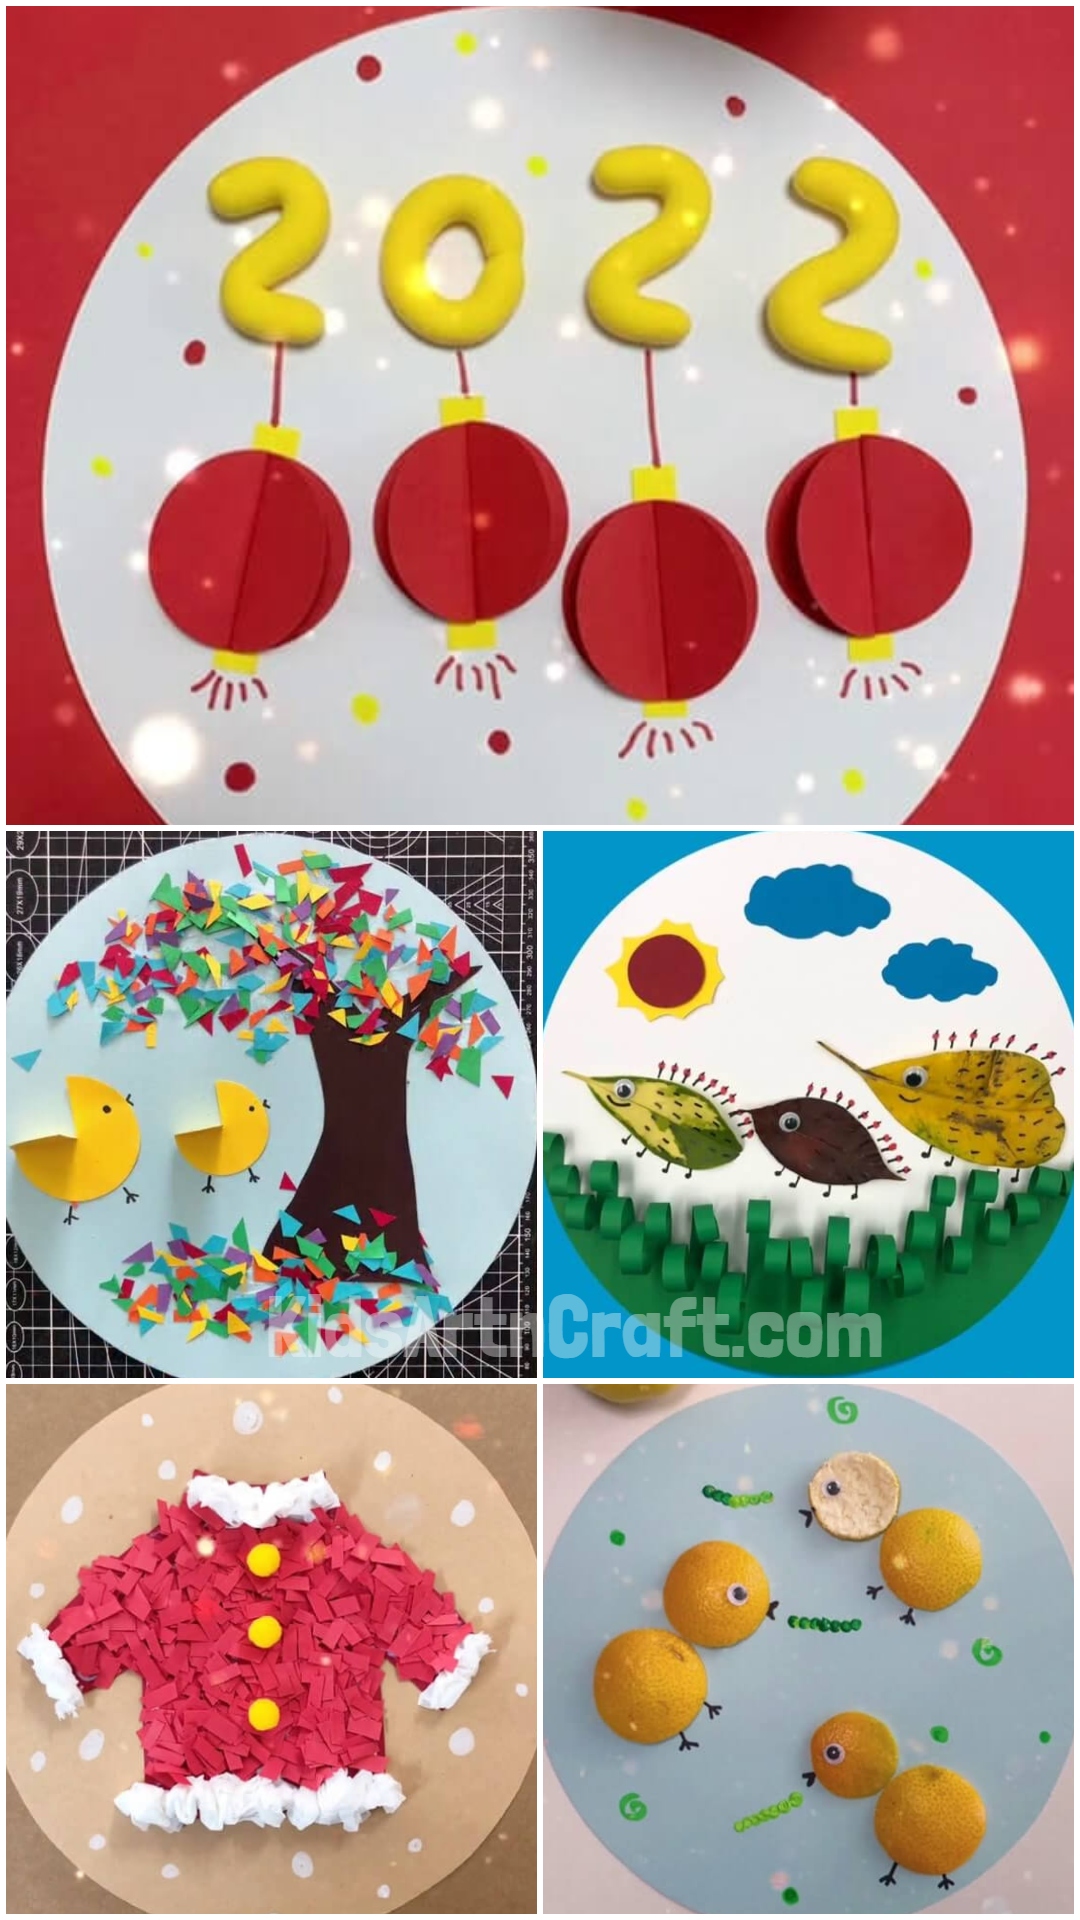 Colorful Art And Craft Project Ideas for Kids